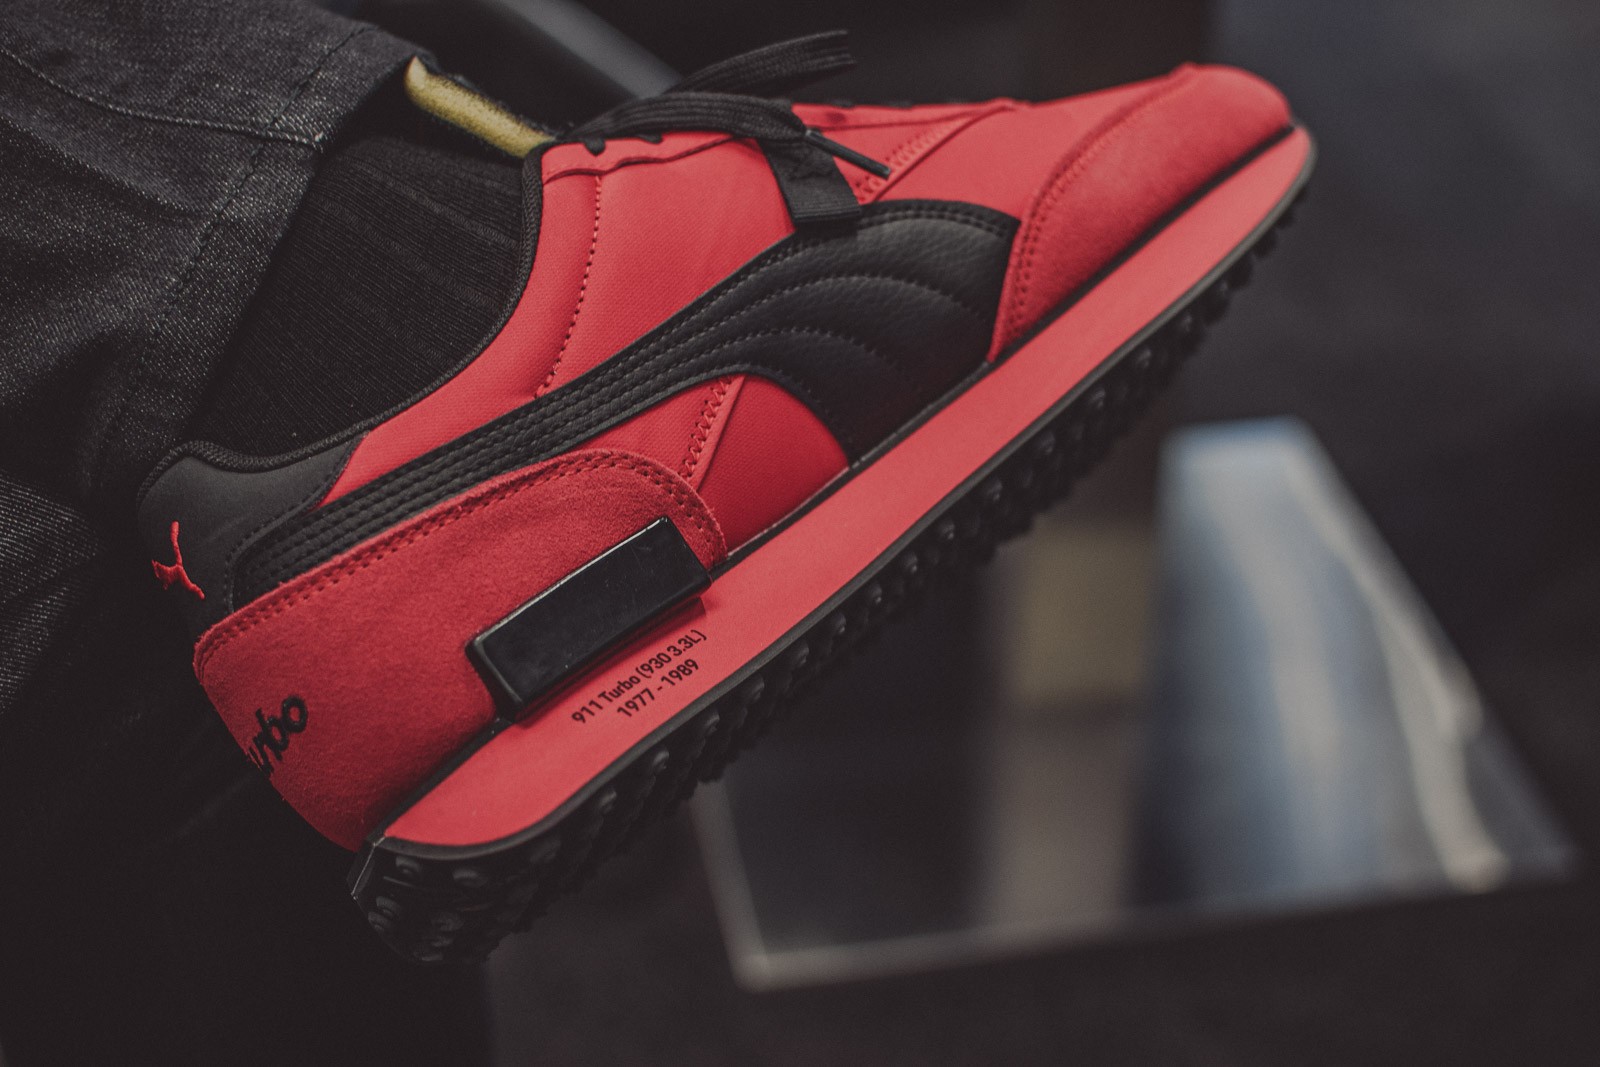 Limited Edition Puma 911 Turbo sneakers